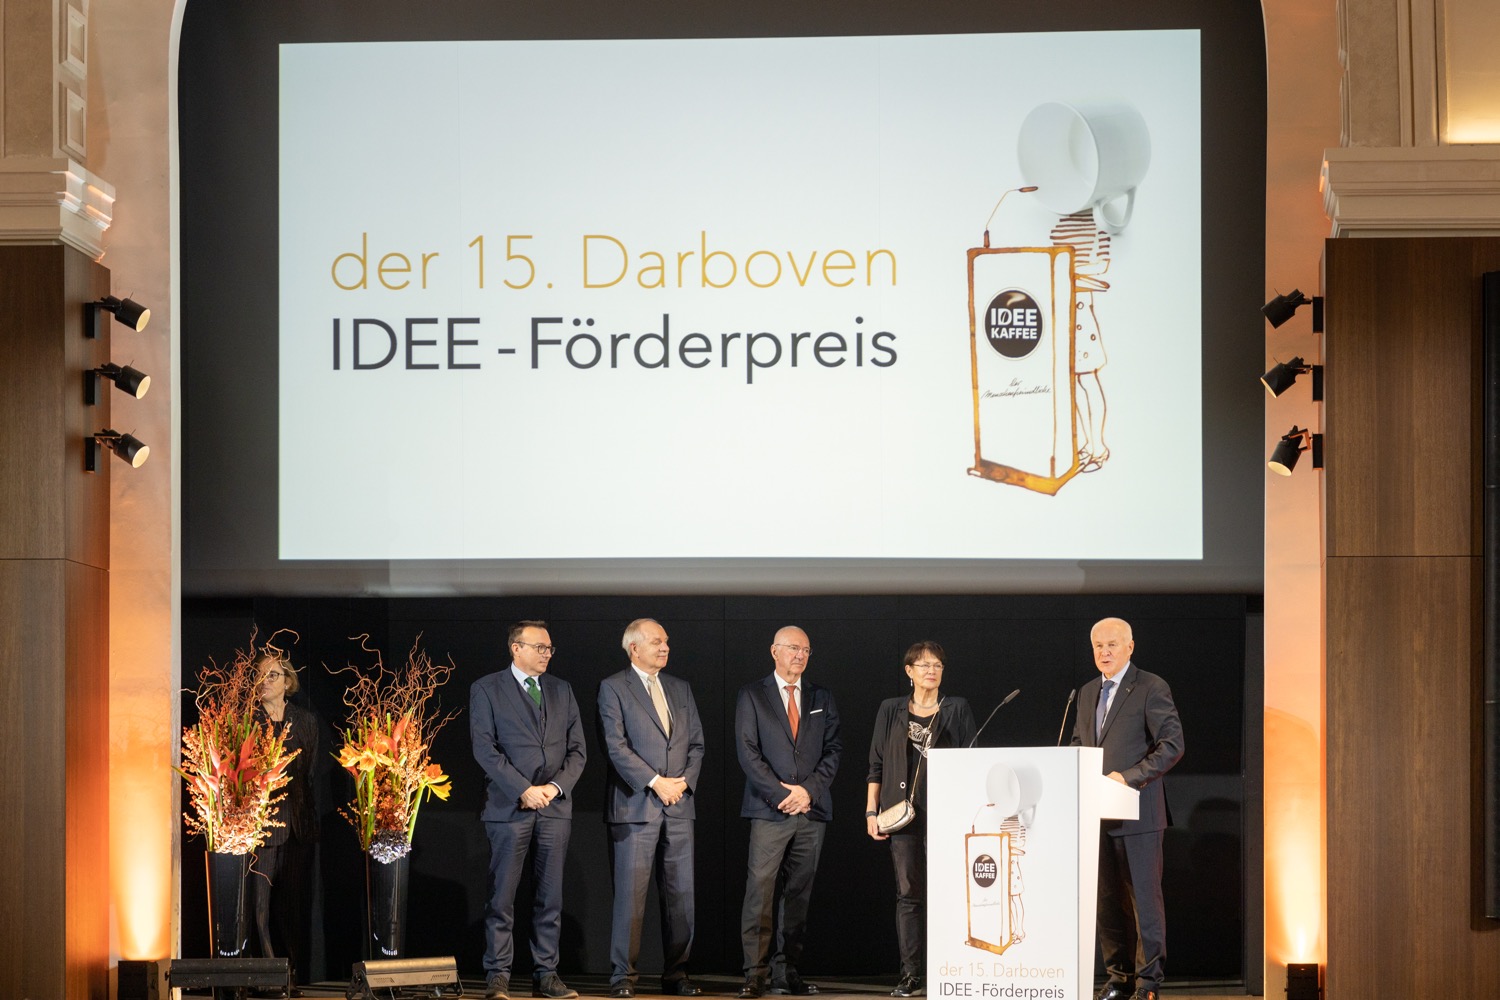 People on stage - Darboven IDEE Sponsorship Prize 2021